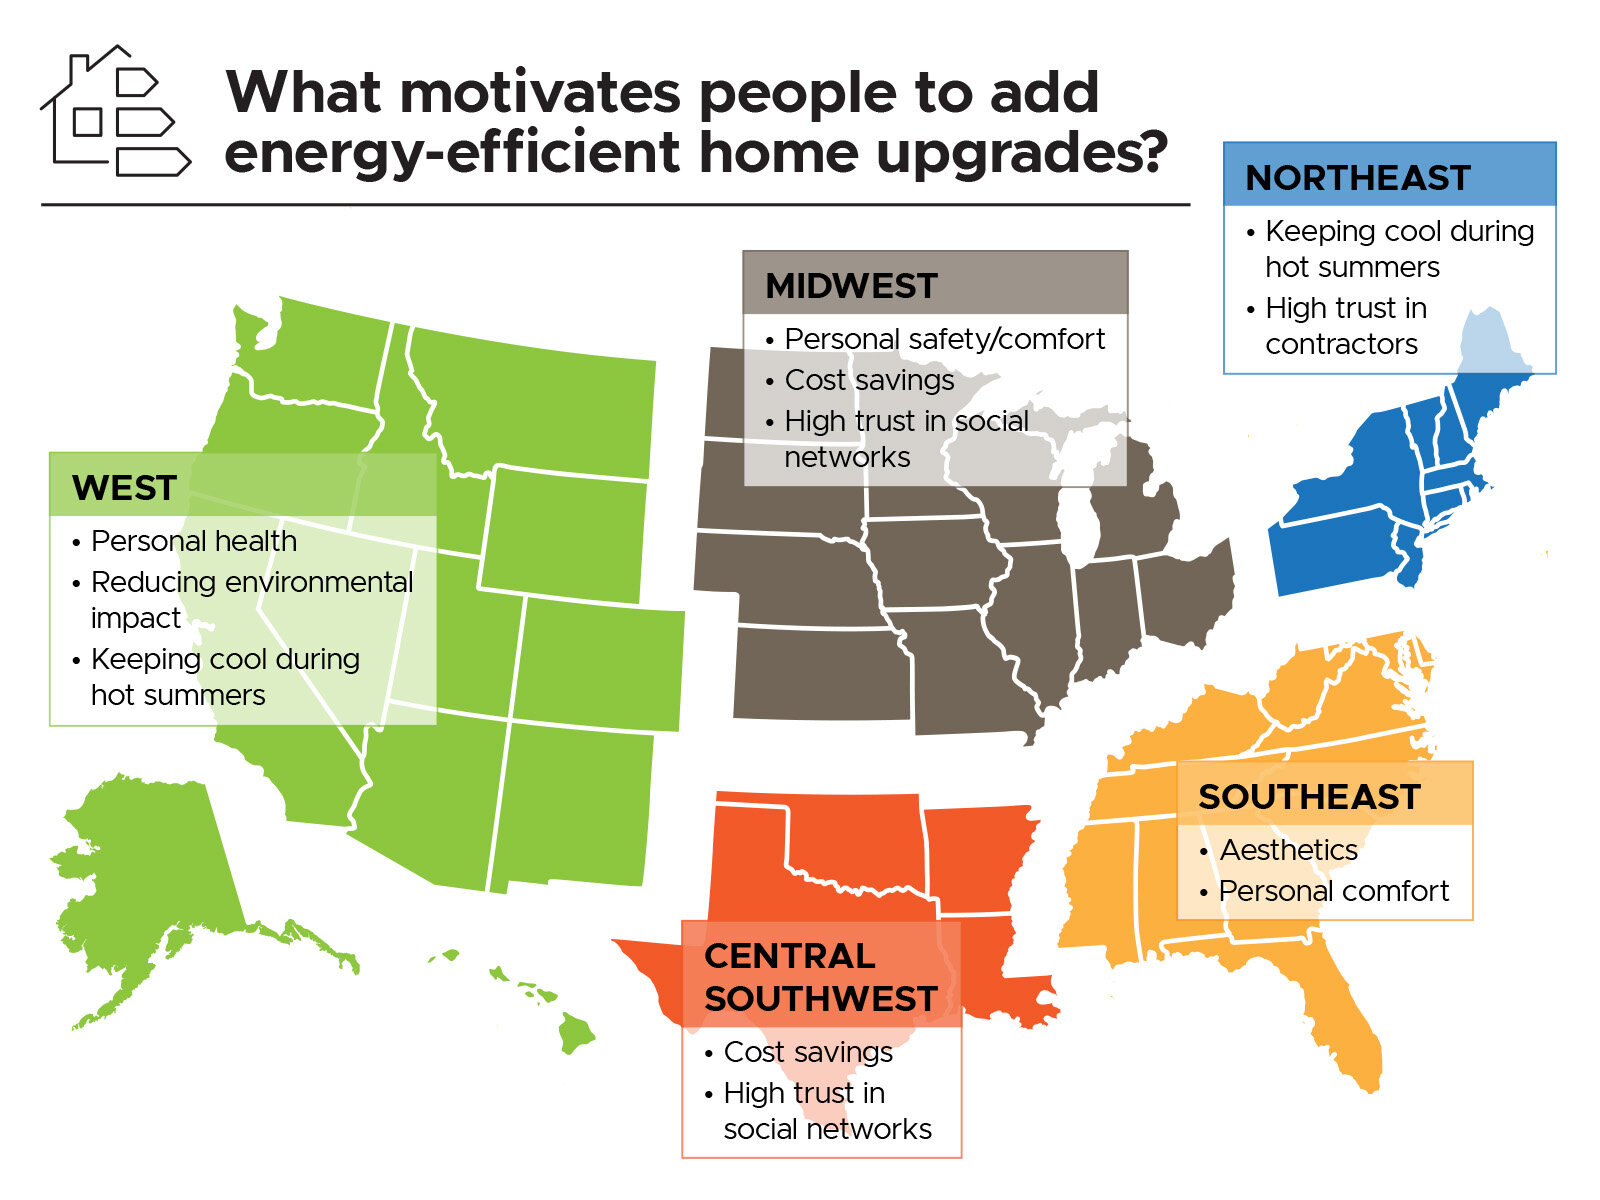 #Motivation behind energy-efficient upgrades differs by location